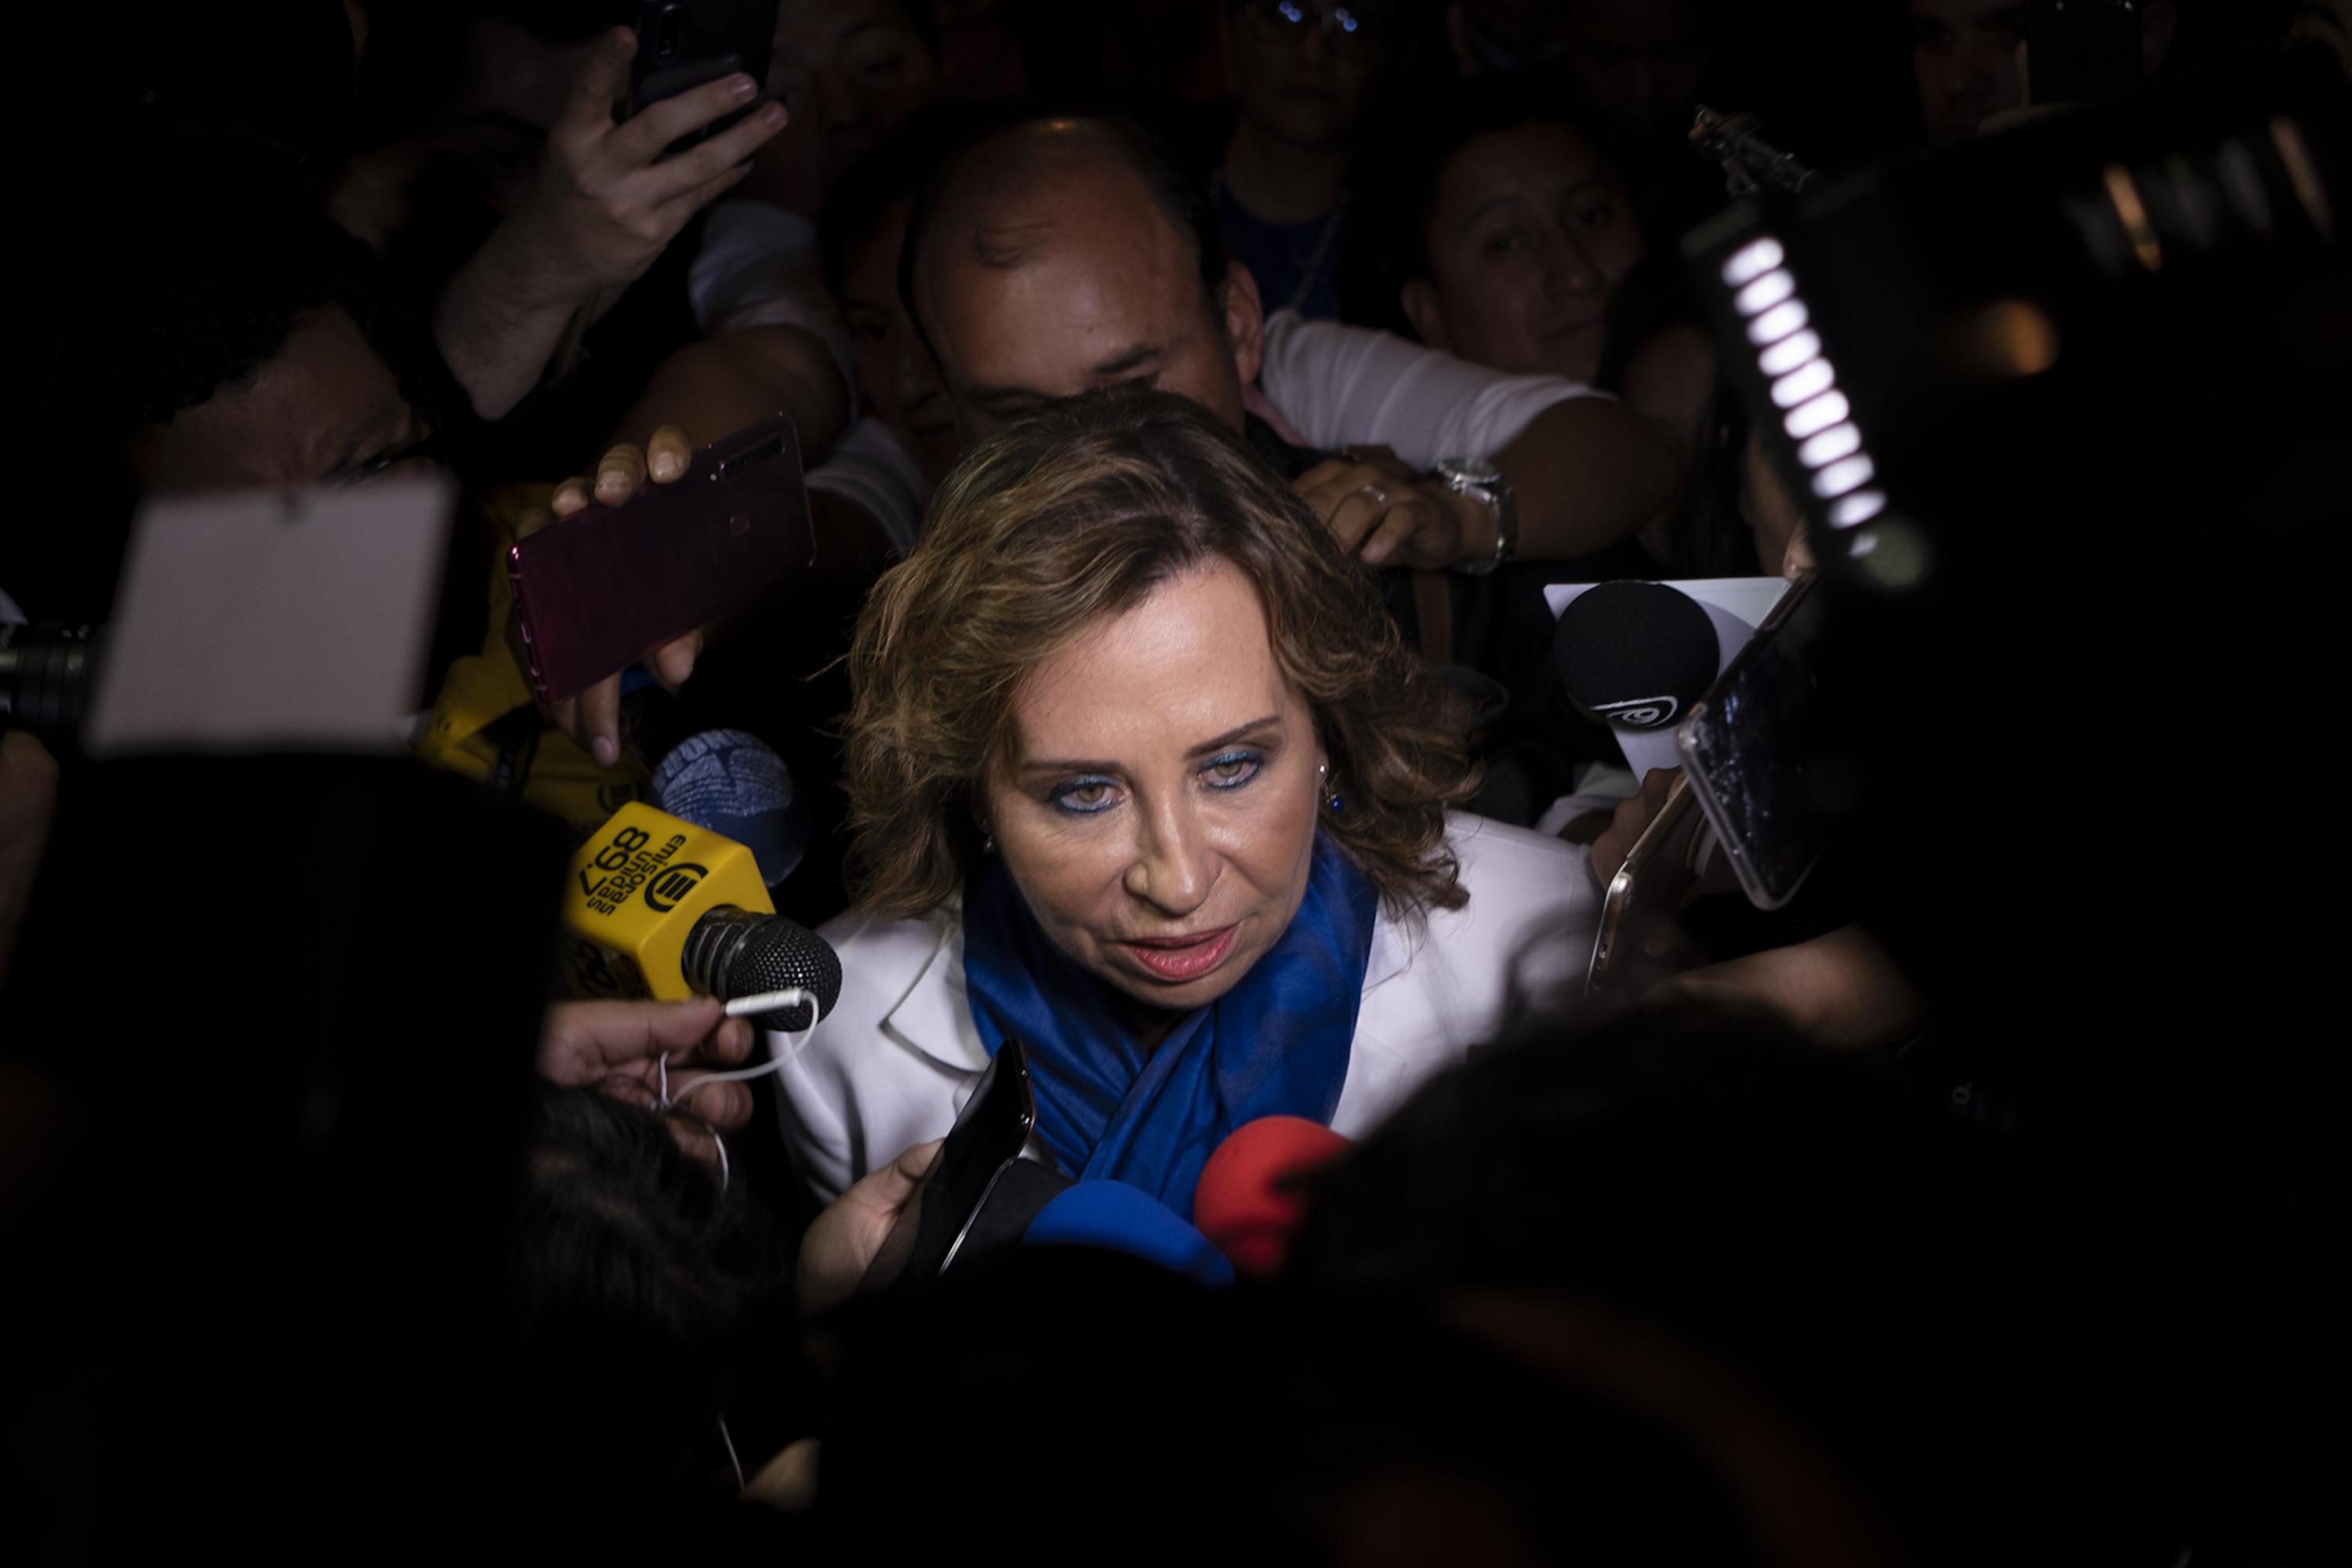 Former First Lady Sandra Torres speaks to the press in Guatemala City in June 2019 after advancing to the run-off presidential election. Photo Carlos Barrera